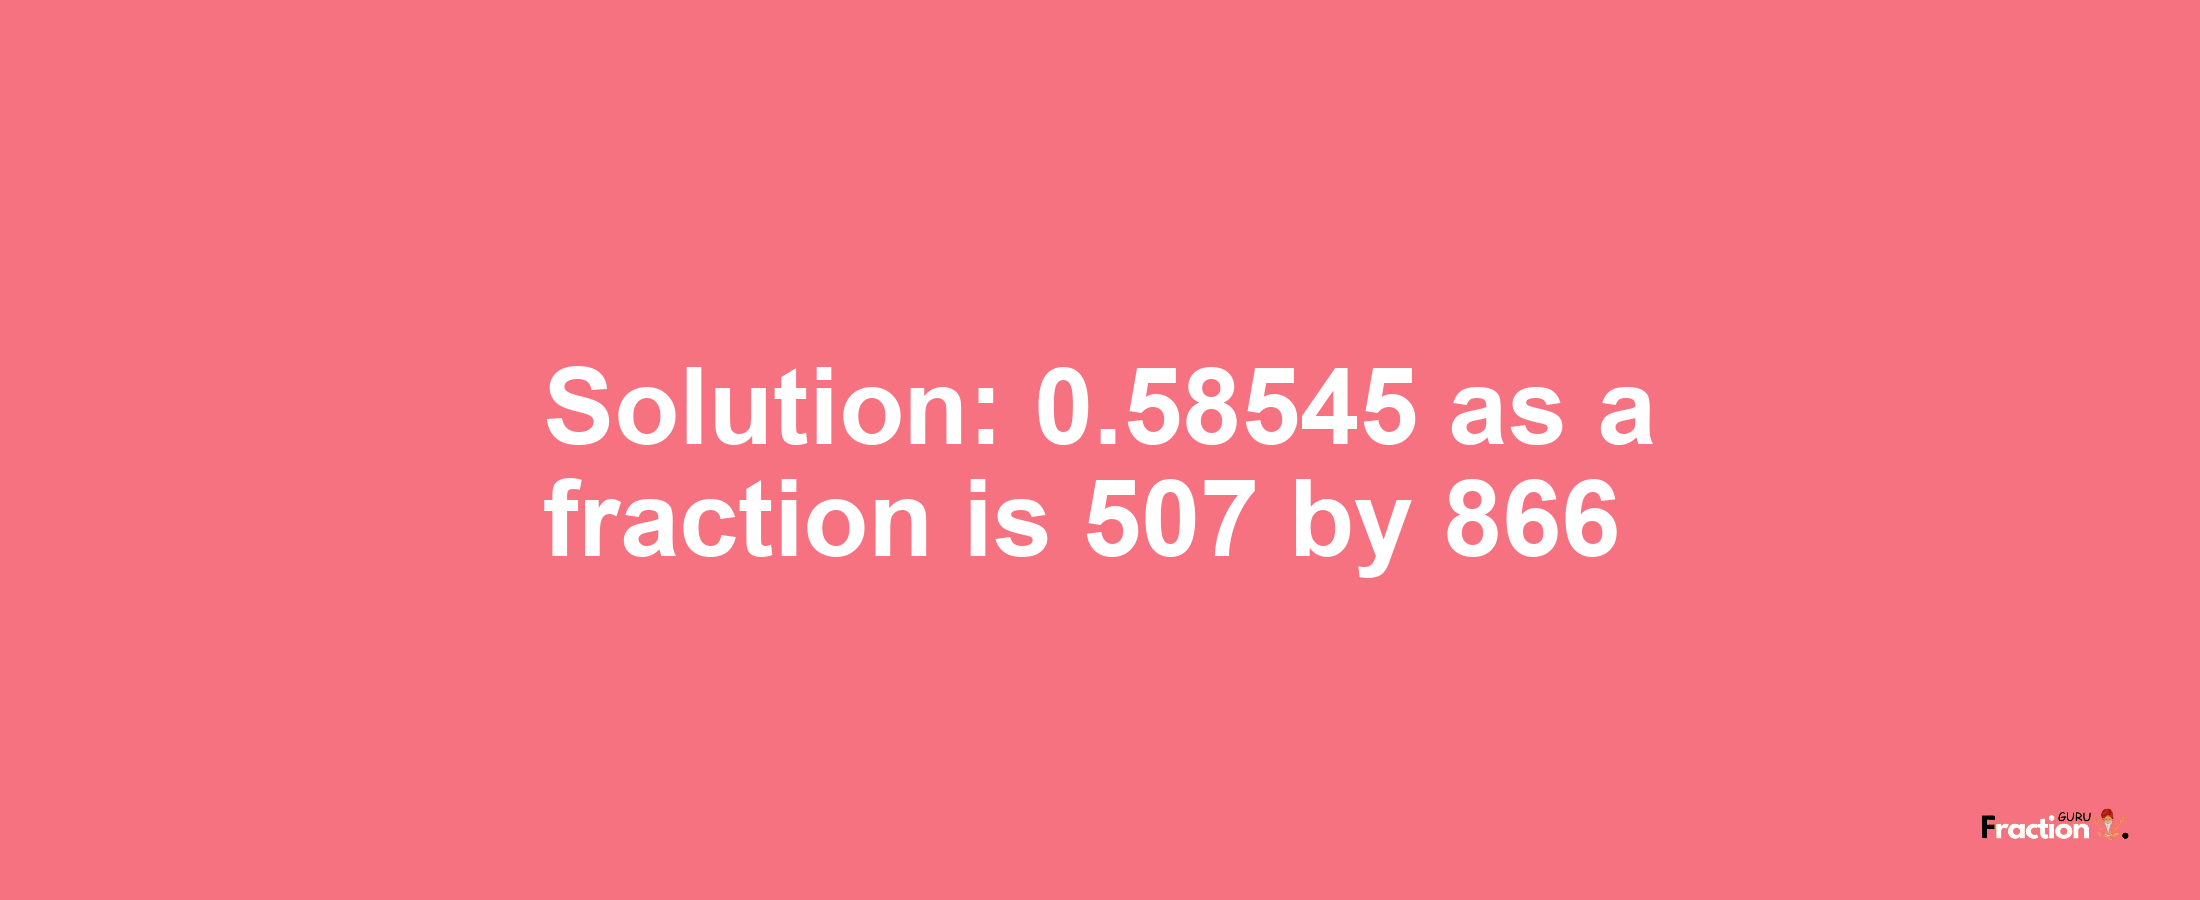 Solution:0.58545 as a fraction is 507/866